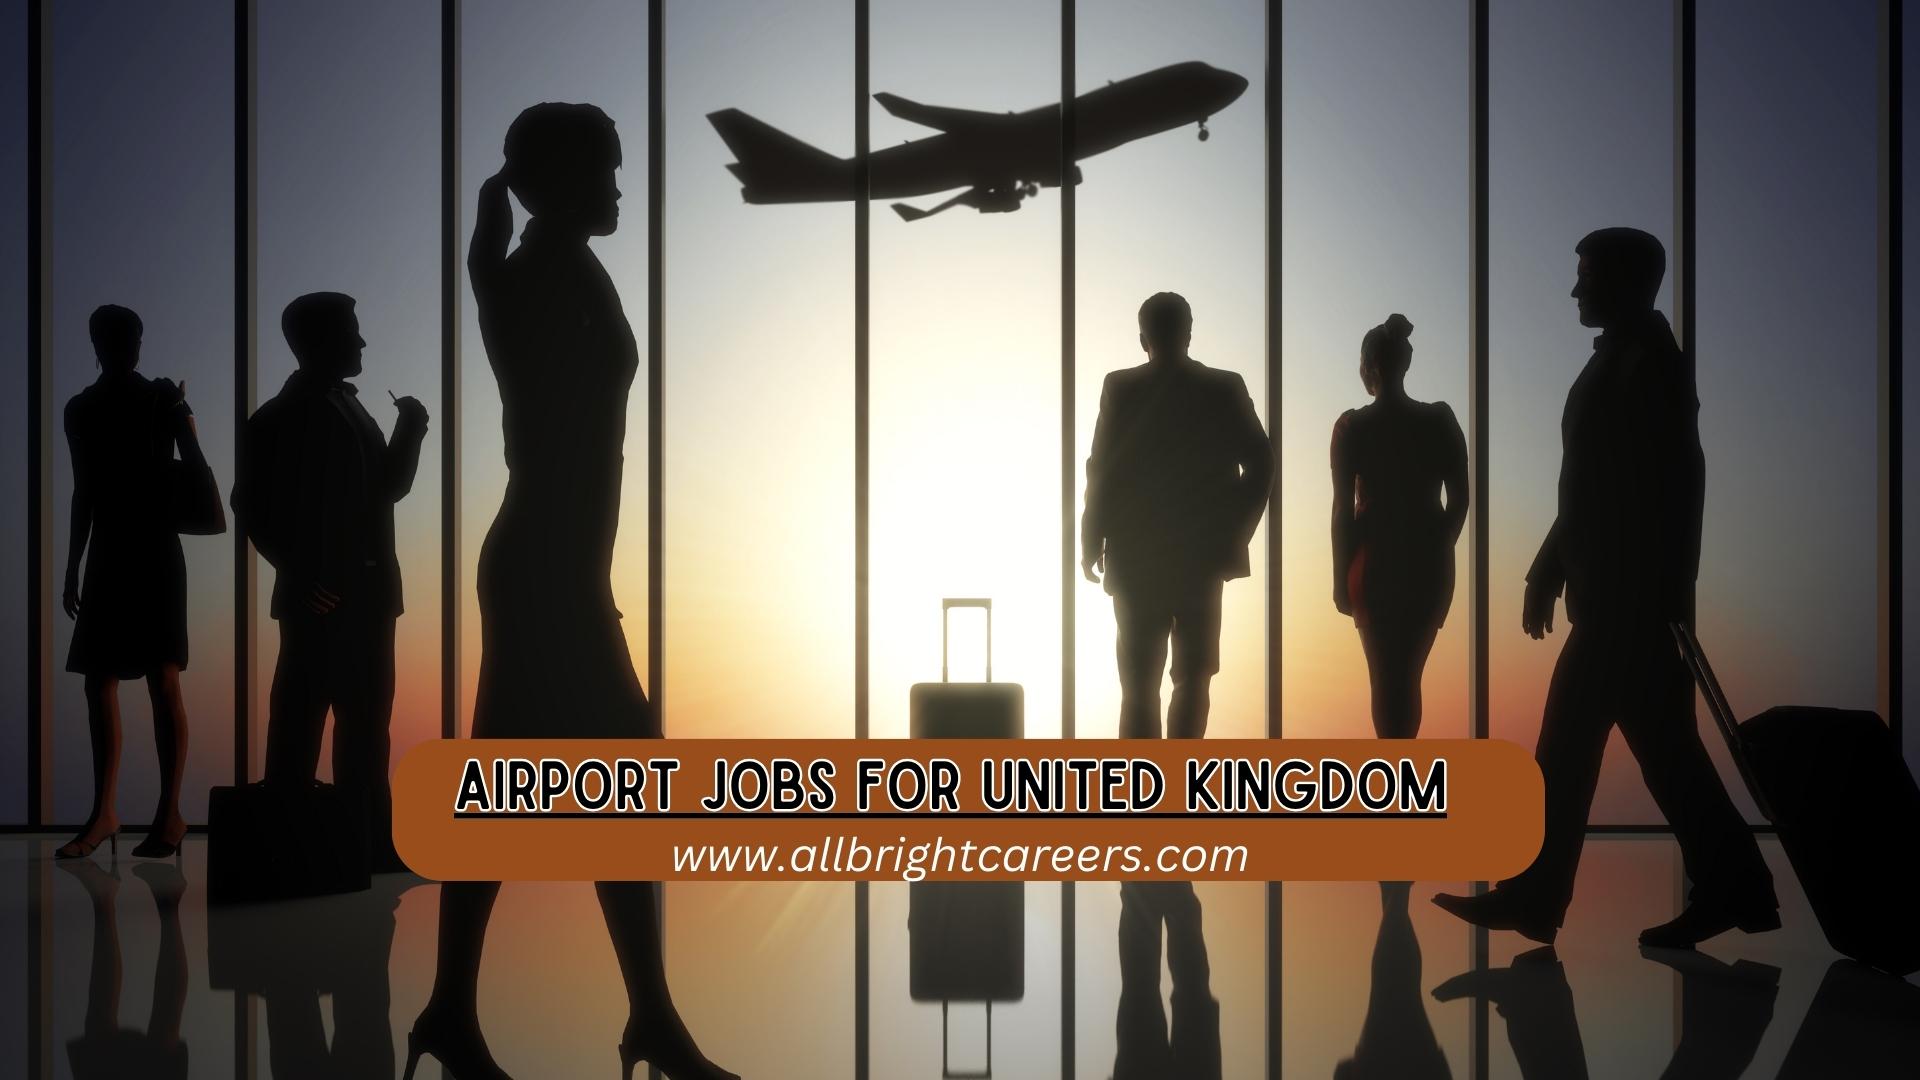 Airport jobs for United Kingdom